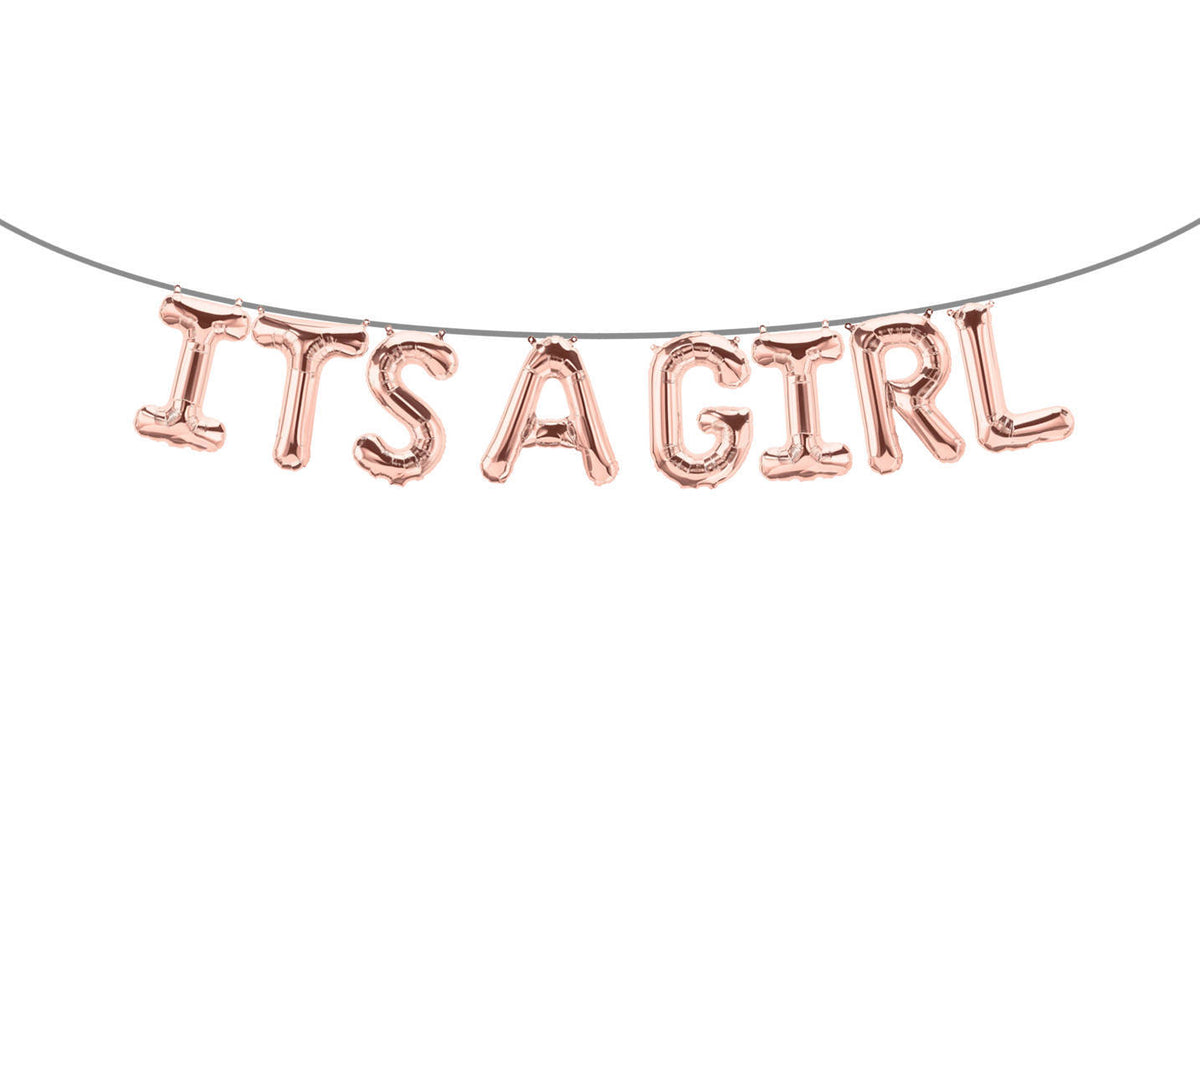 ITS A GIRL Rose Gold Foil Balloon 16" For Baby Shower Gender Reveal